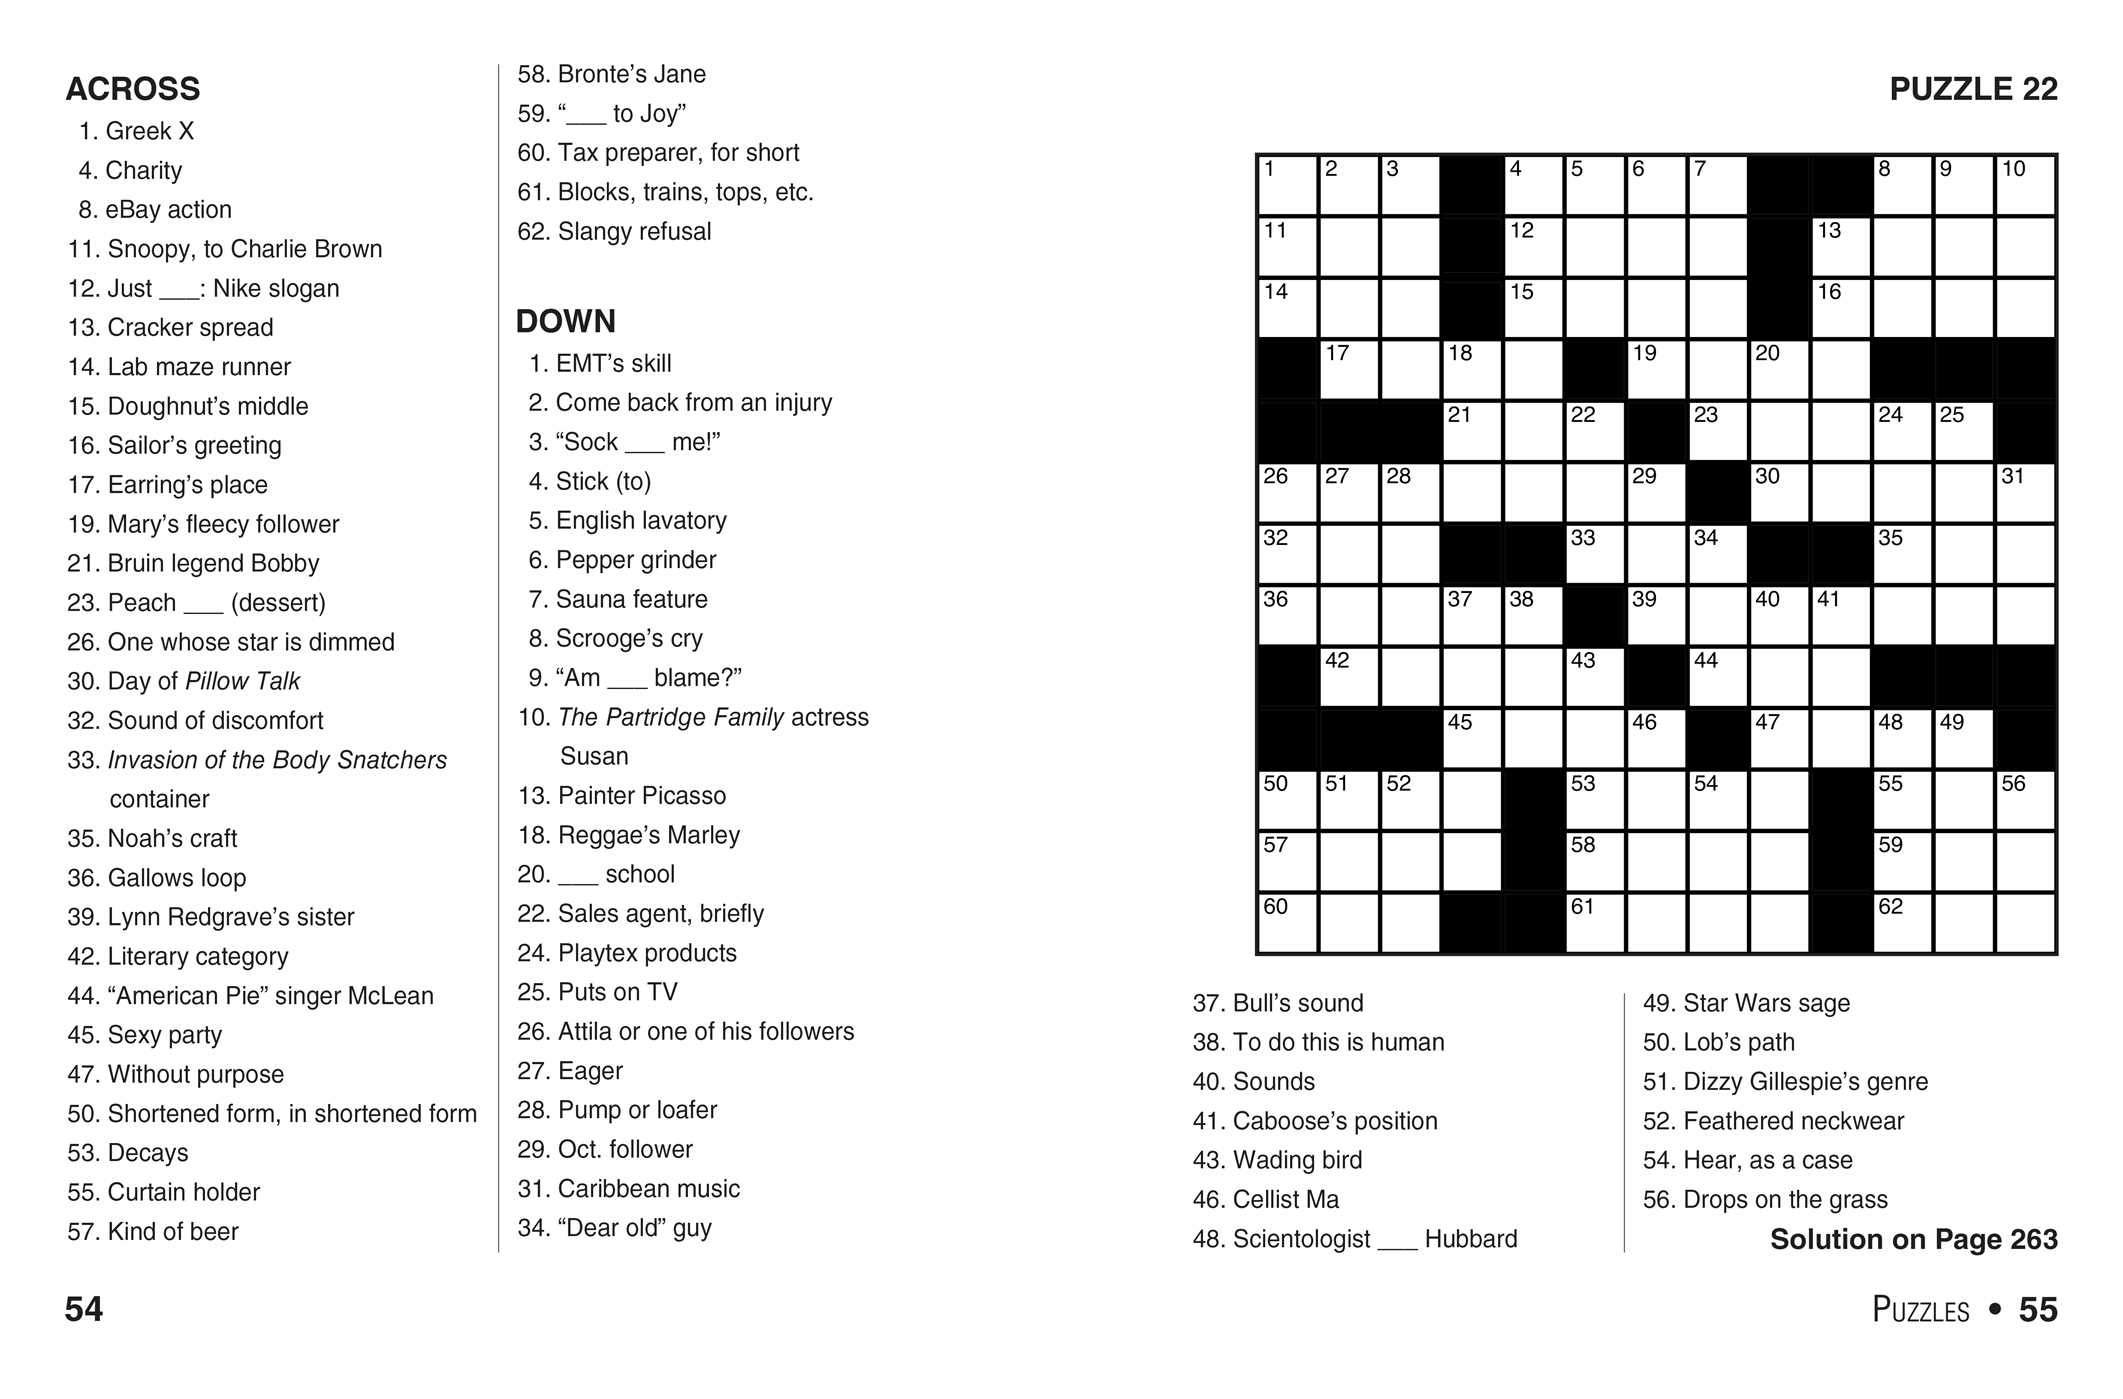 Coloring ~ Coloring Free Large Print Crosswords Easy For Seniors - Printable Crosswords By Thomas Joseph